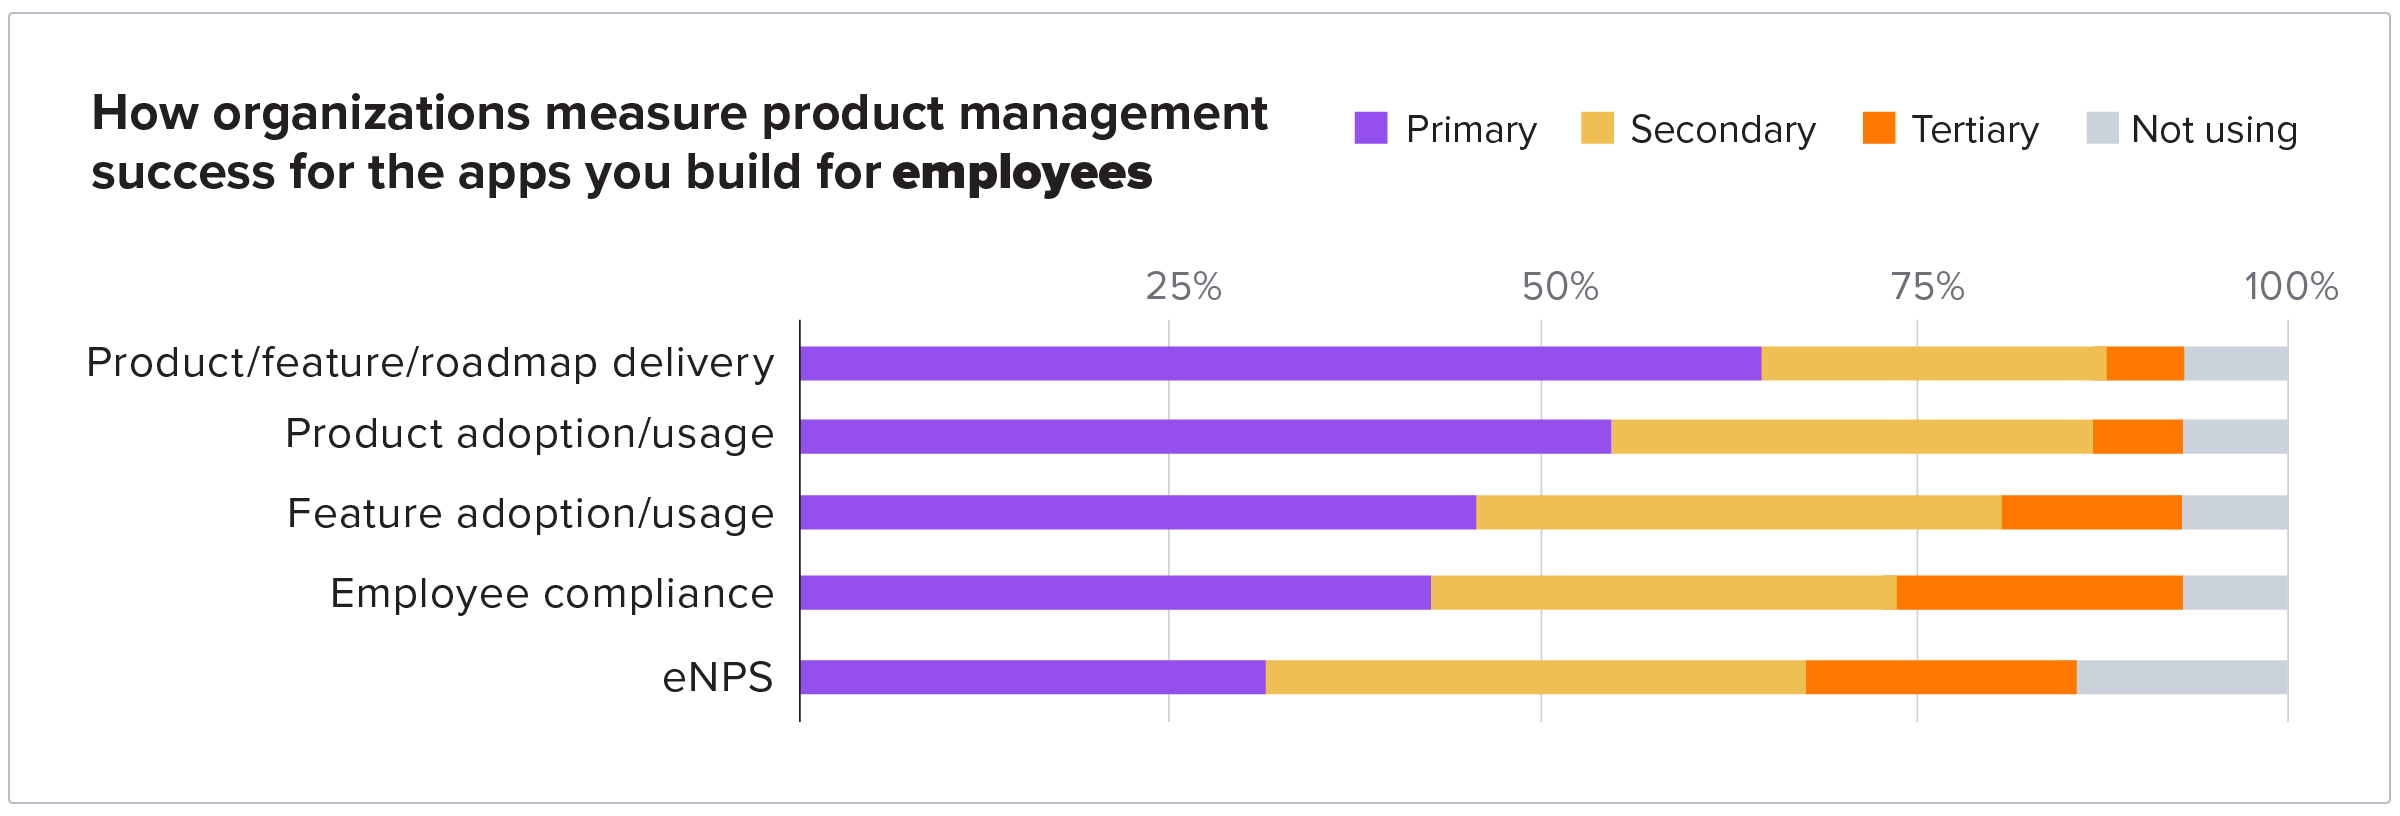 How organizations measure product management success for apps you build for employees